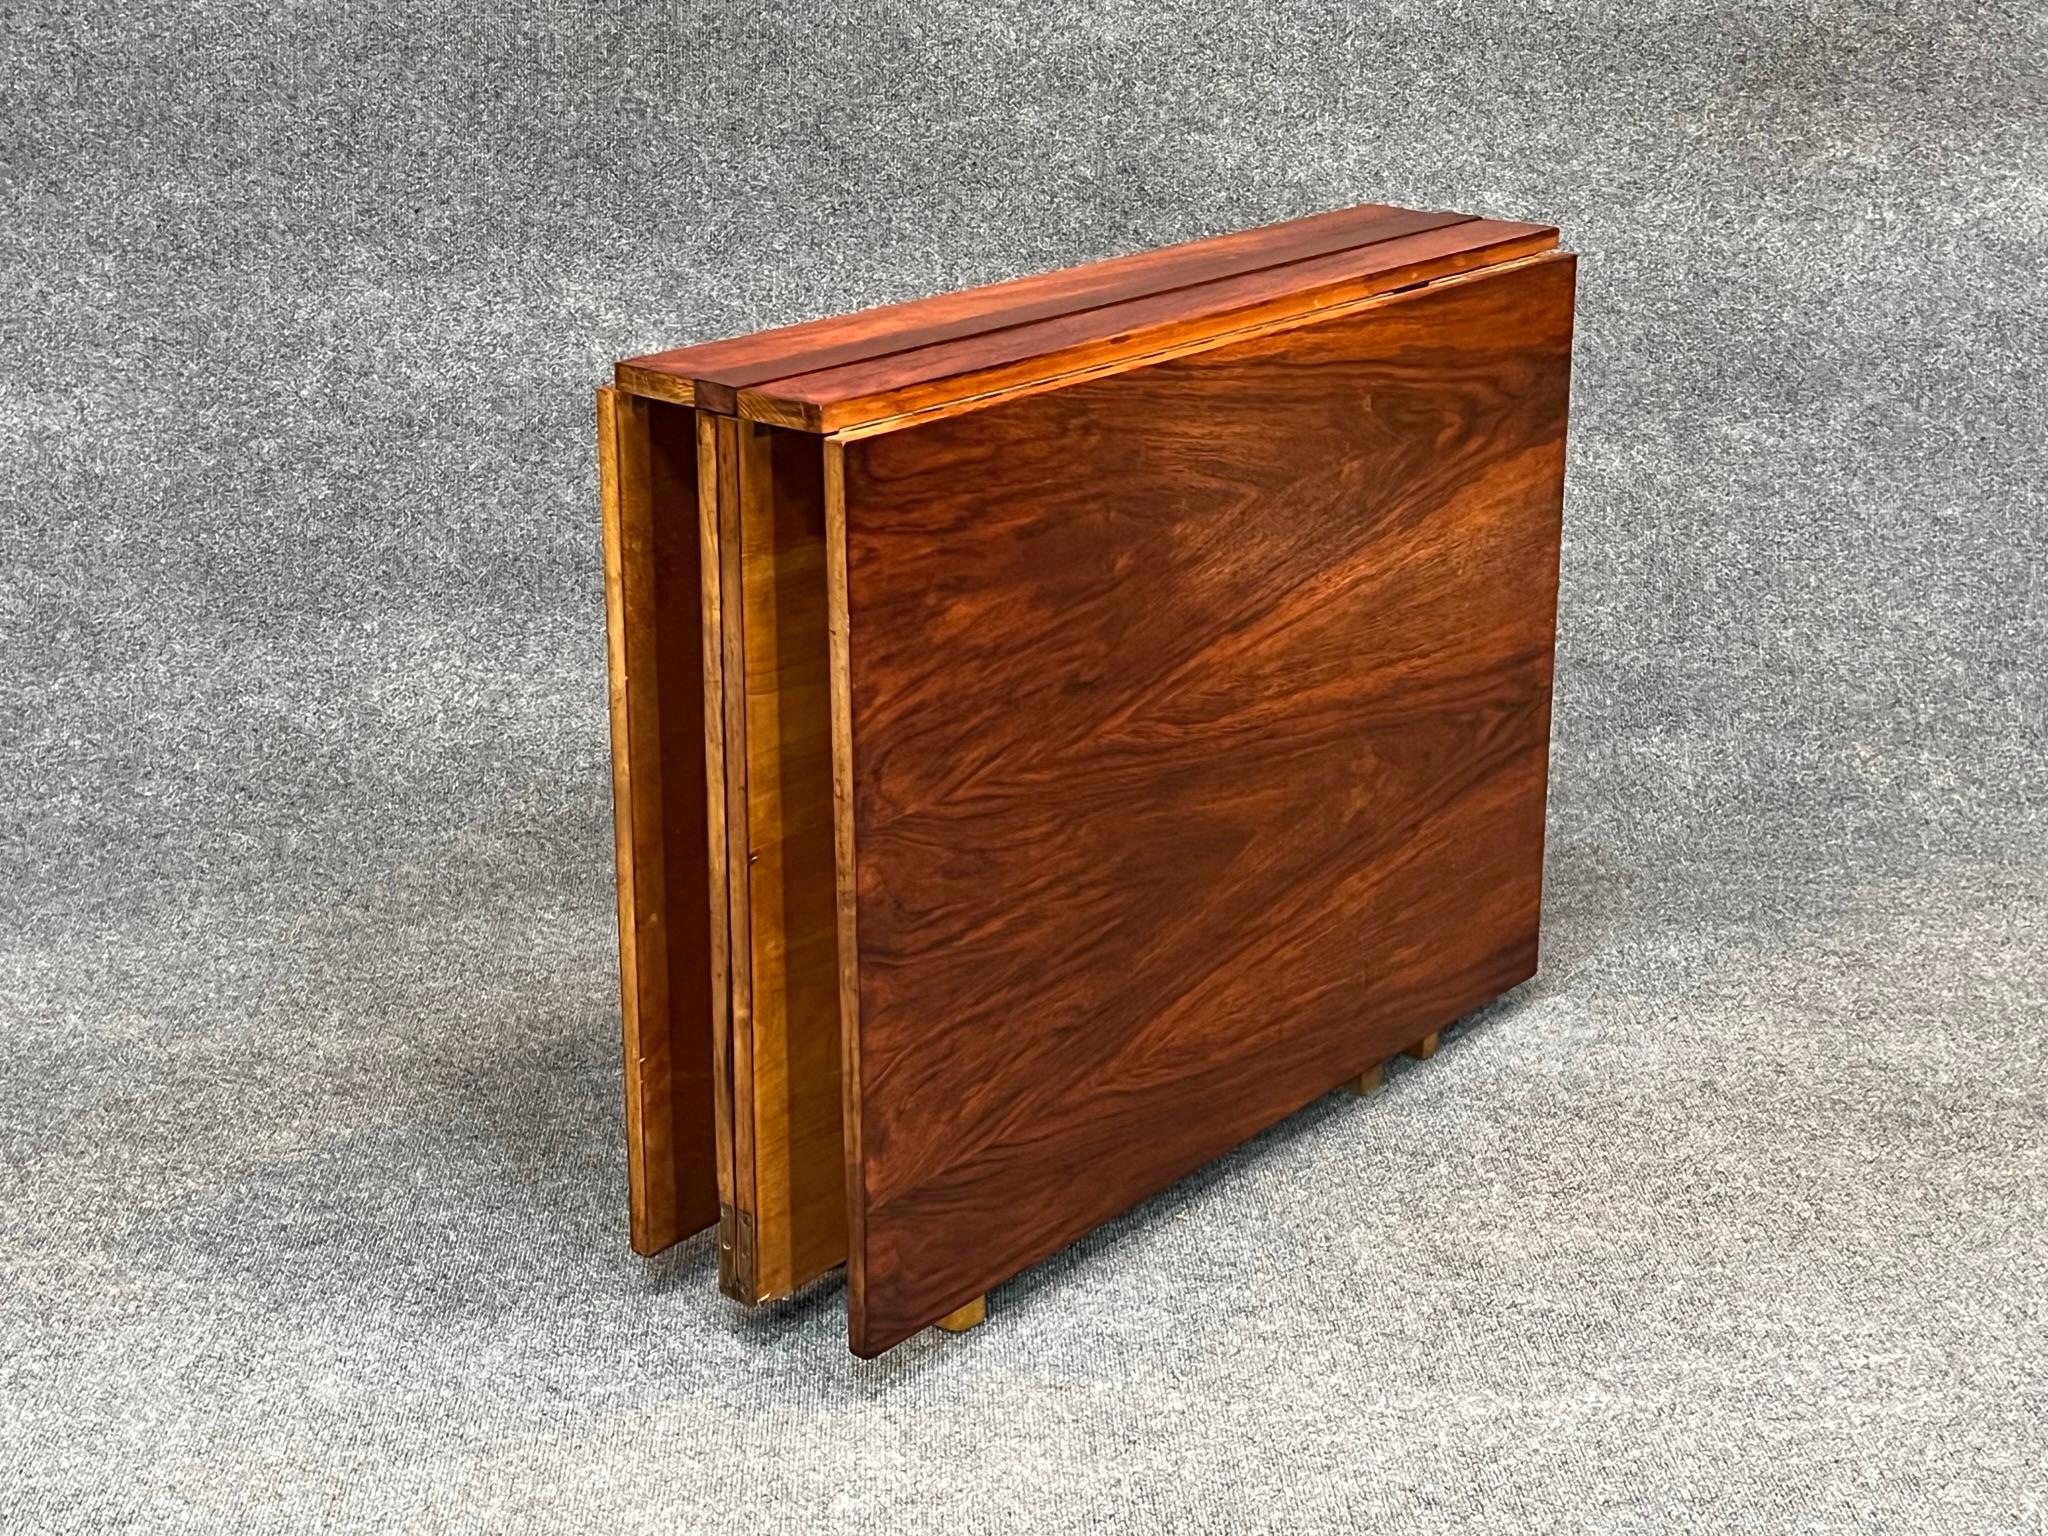 Rosewood Bruno Mathsson Maria folding dining table, Sweden, circa 1936

Rare Mid-Century Modern Bruno Mathsson Maria folding table crated in rosewood and made in Sweden. Amazing cleaver and versatile design that can be configured in numerous